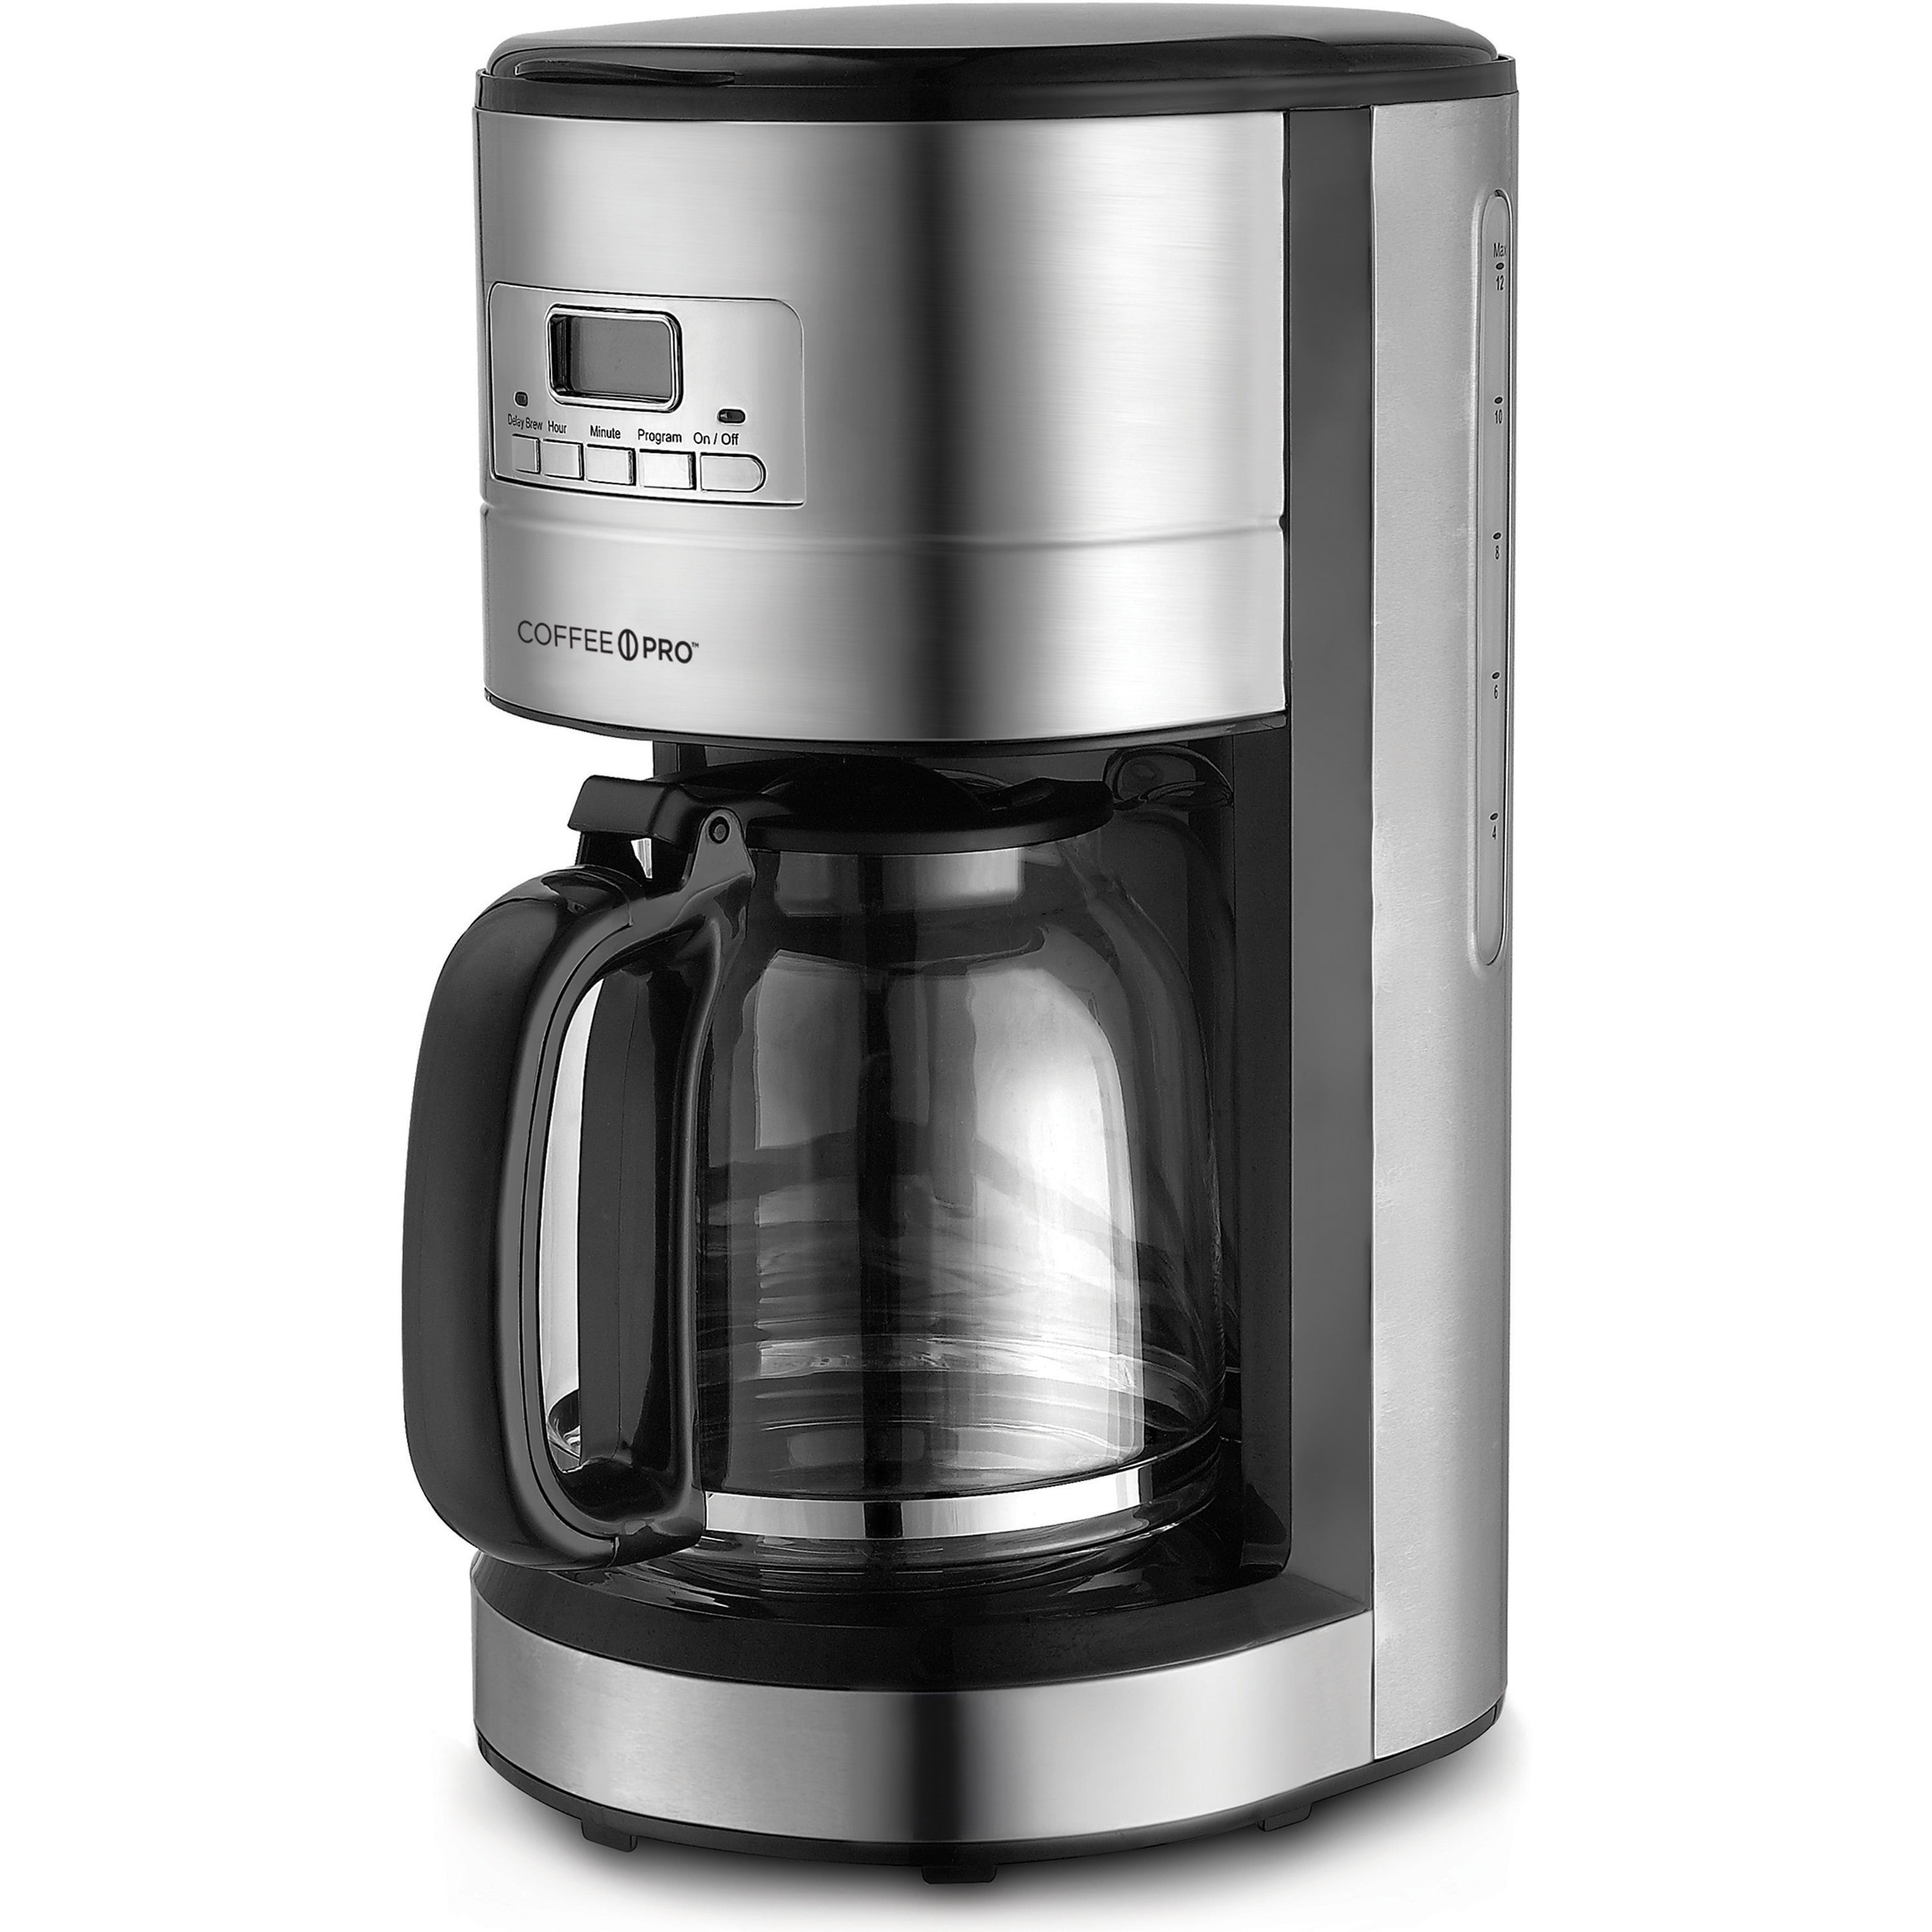 Hamilton Beach Premium Flavor Coffee Maker, 12 Cup Capacity, Black and Stainless Steel, 46221